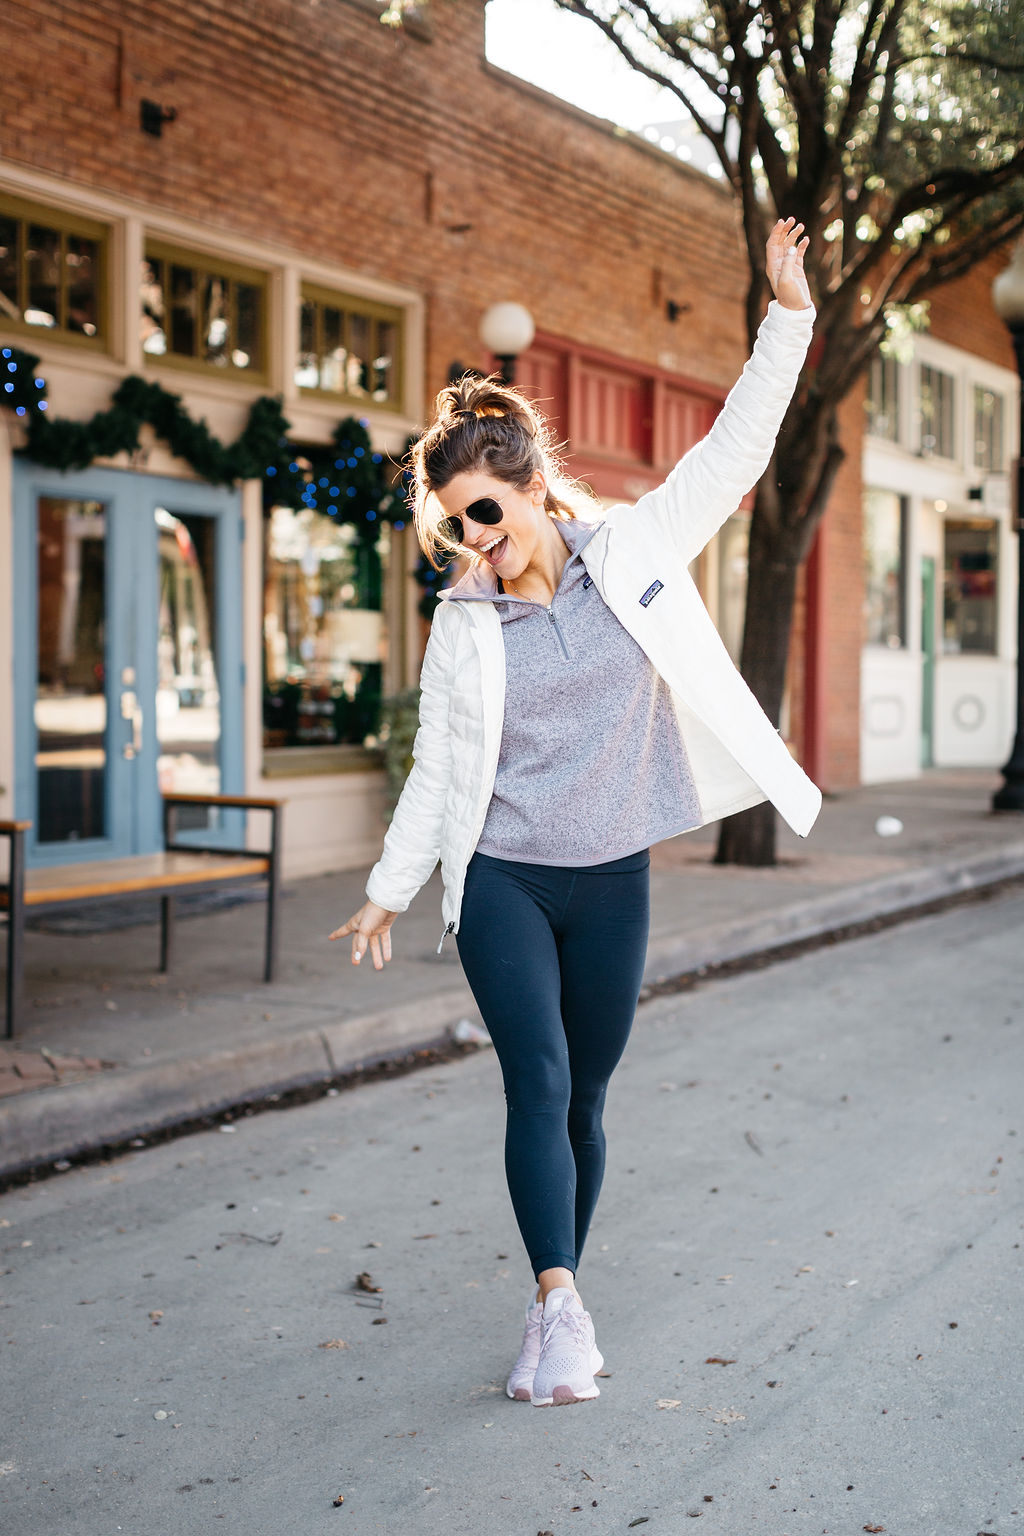 how to find balance when you're busy, brighton keller wearing patagonia white jacket, lilac pullover, athleisure outfit